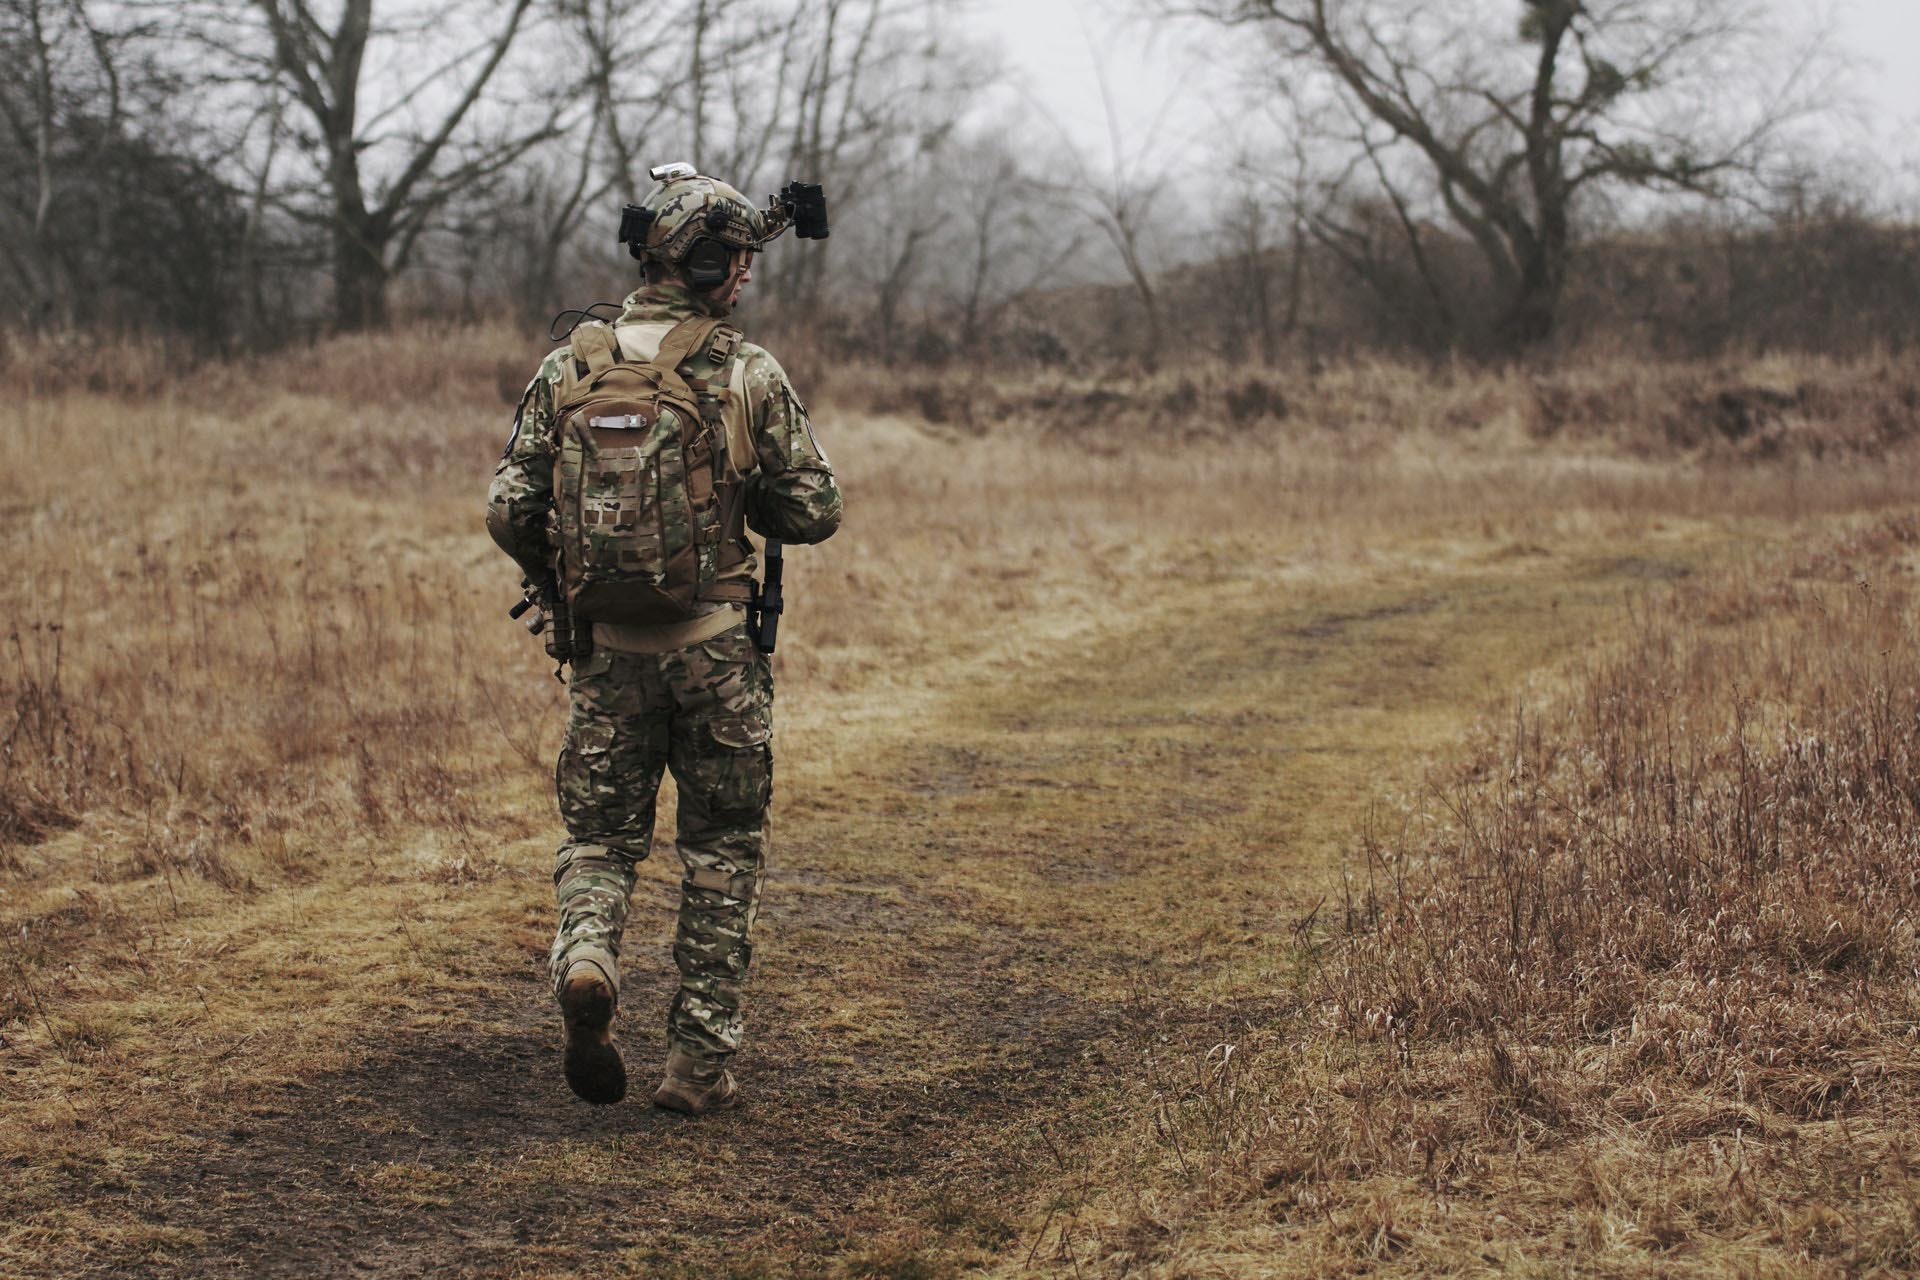 A soldier walking through a dry field on an overcast day.